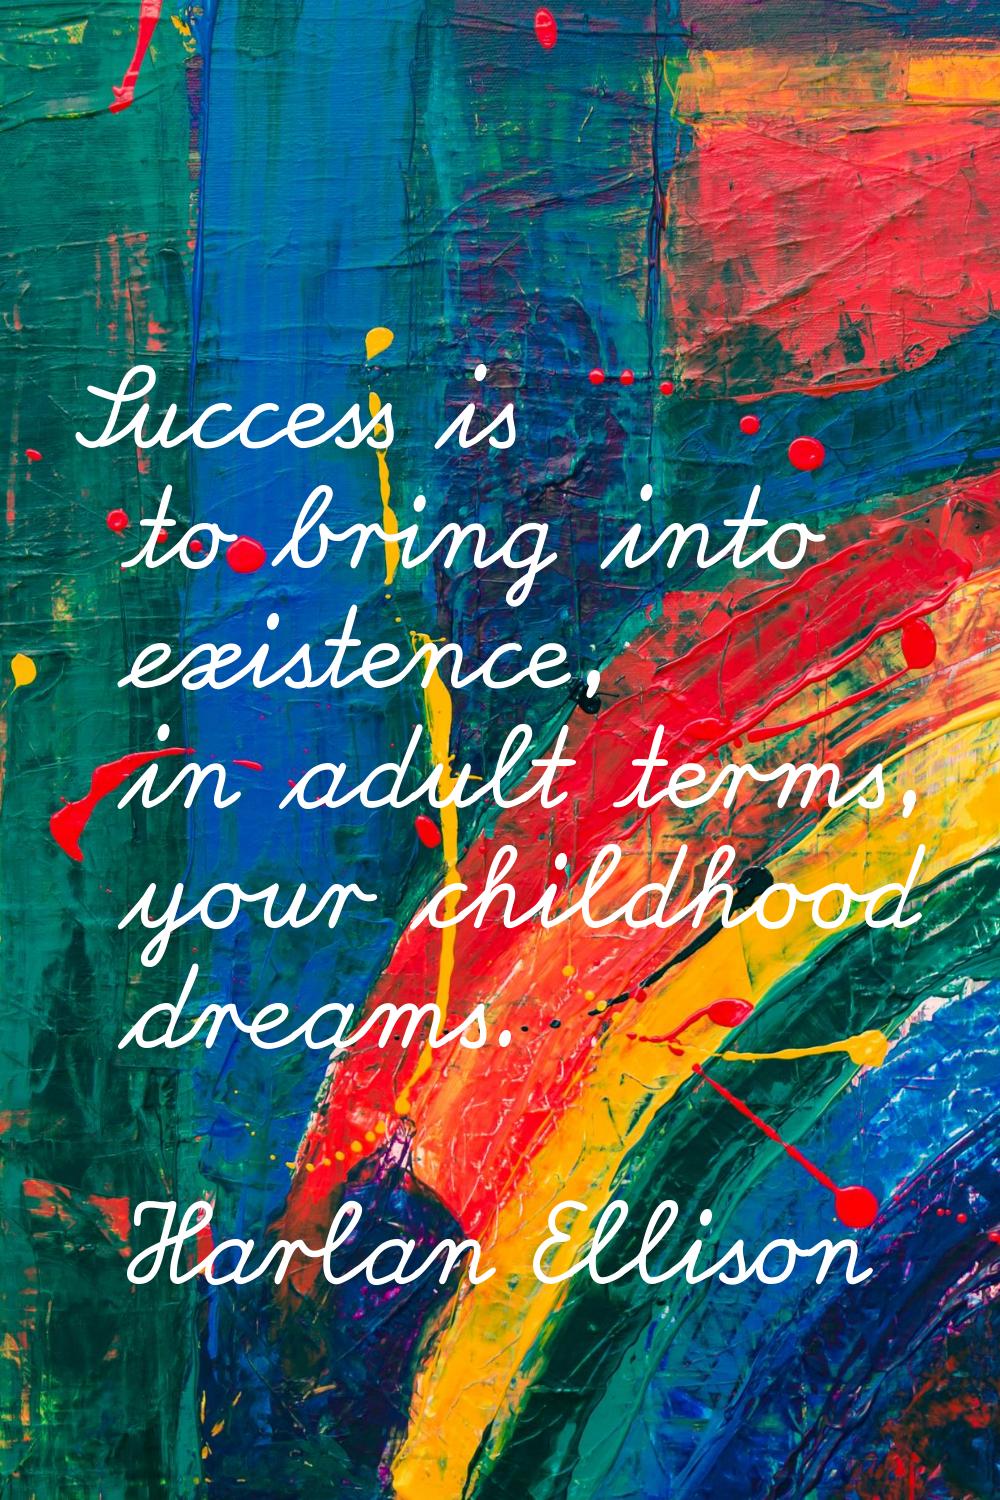 Success is to bring into existence, in adult terms, your childhood dreams.